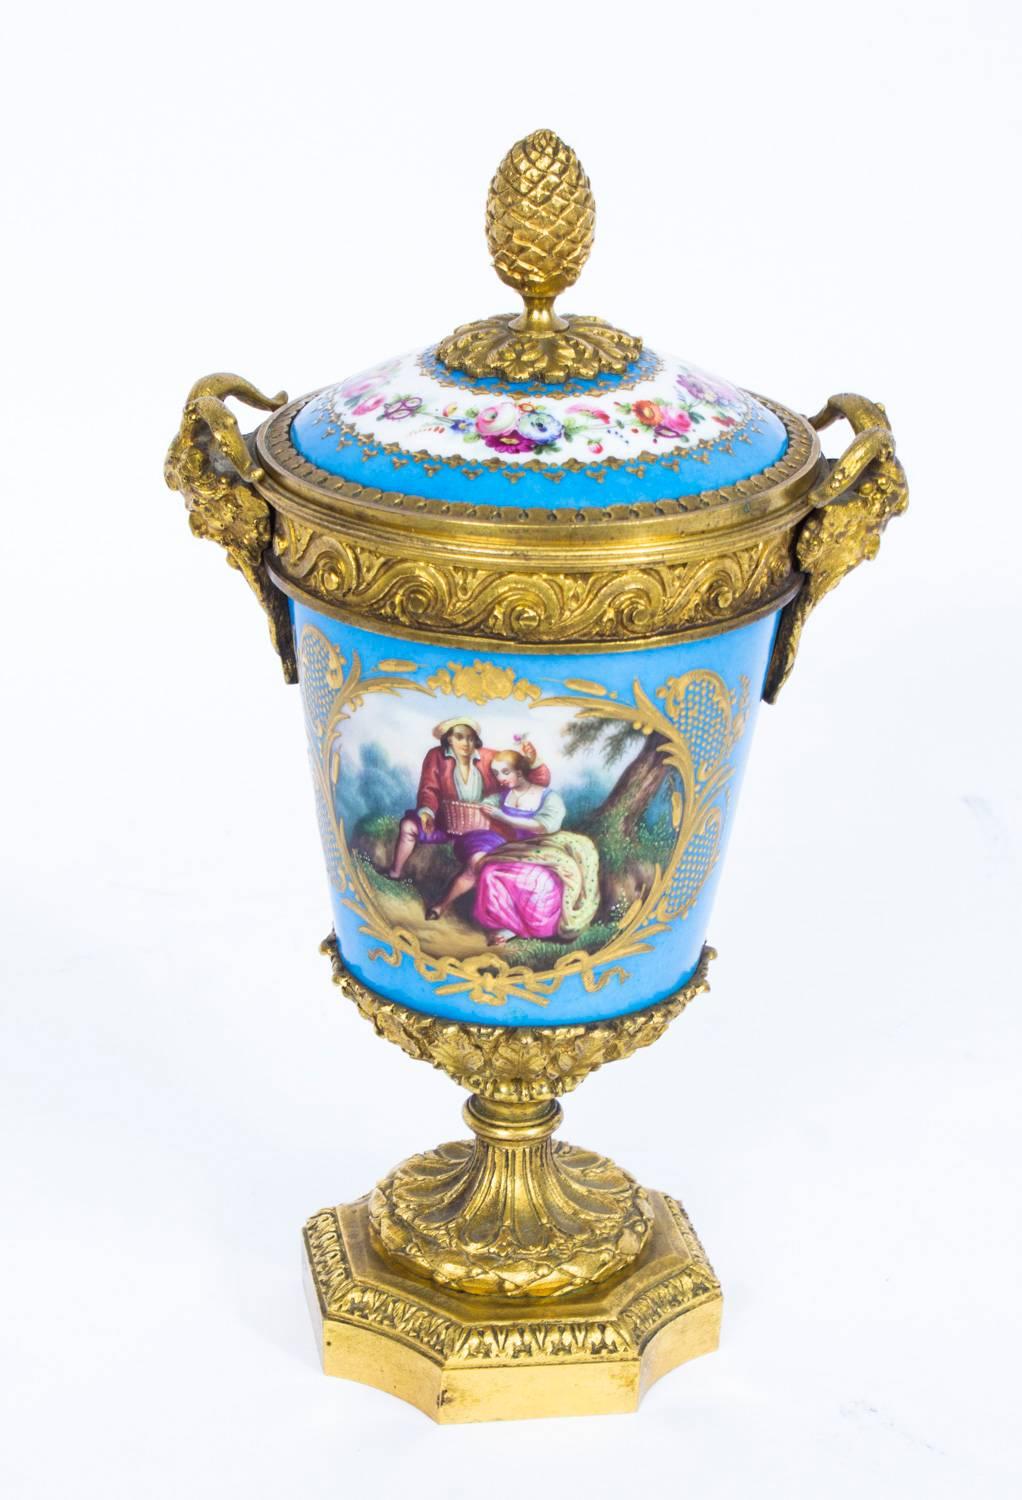 This is a beautiful antique pair of French Sèvres "Bleu Celeste" porcelain and ormolu-mounted garniture vases and covers, in Louis XV style, circa 1860 in date.

They are superbly decorated in the Sèvres manner with hand painted floral